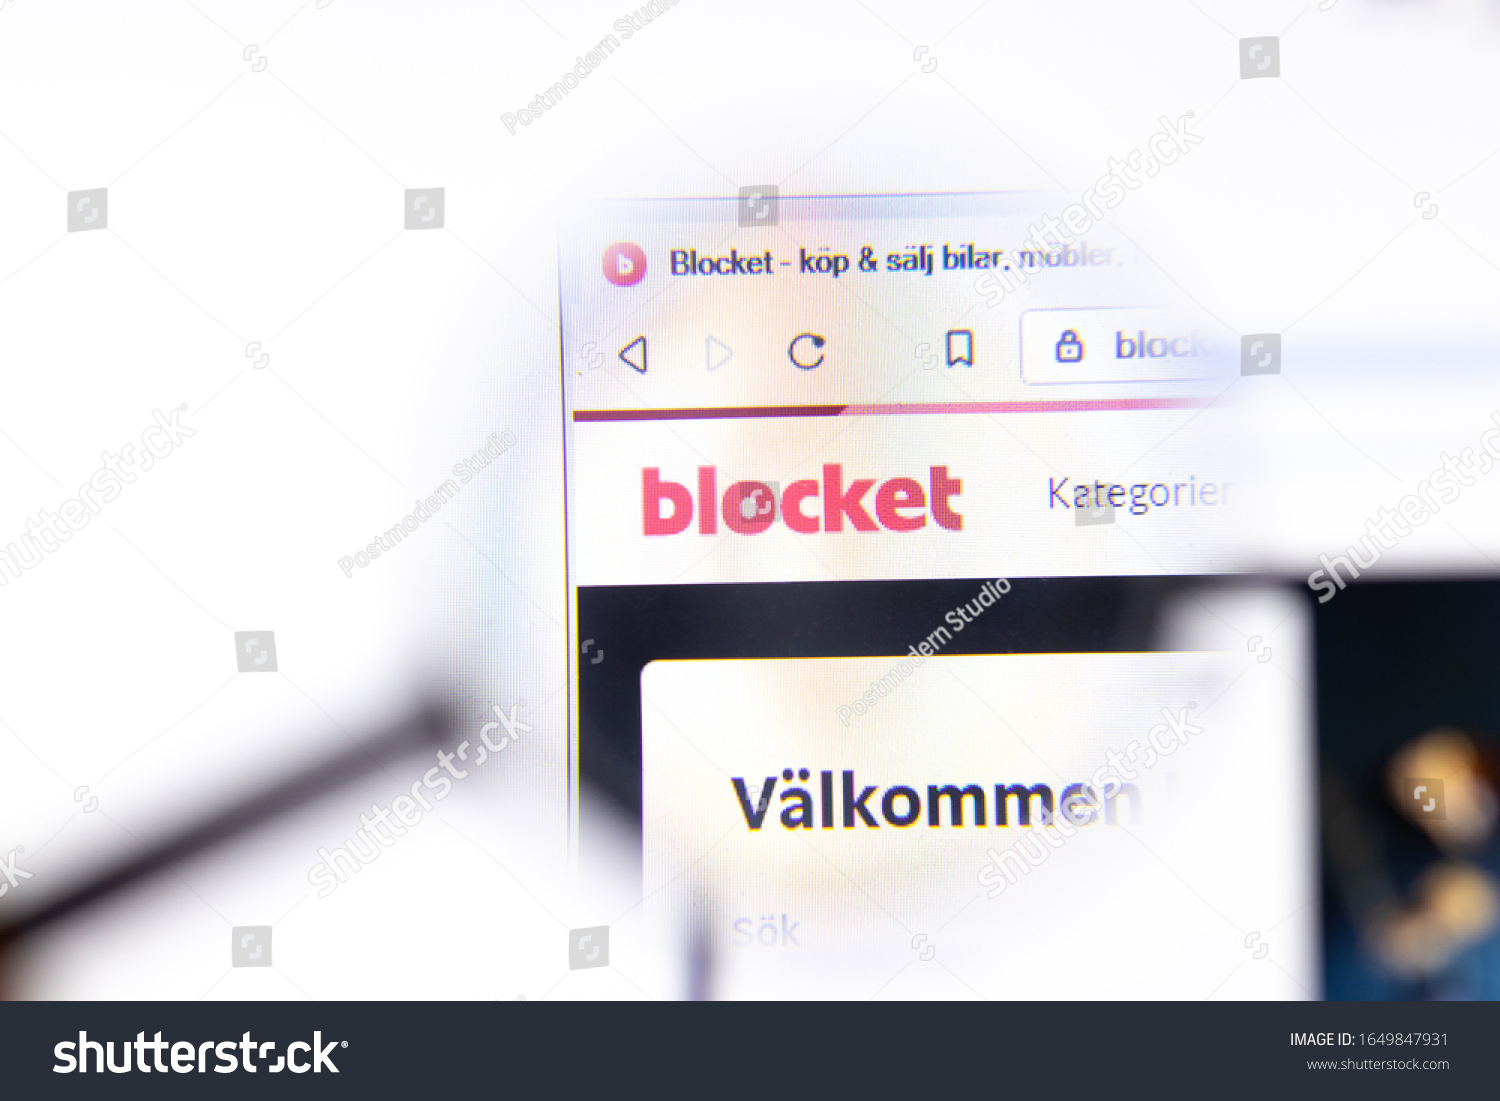 Blocket - Overview, News & Competitors